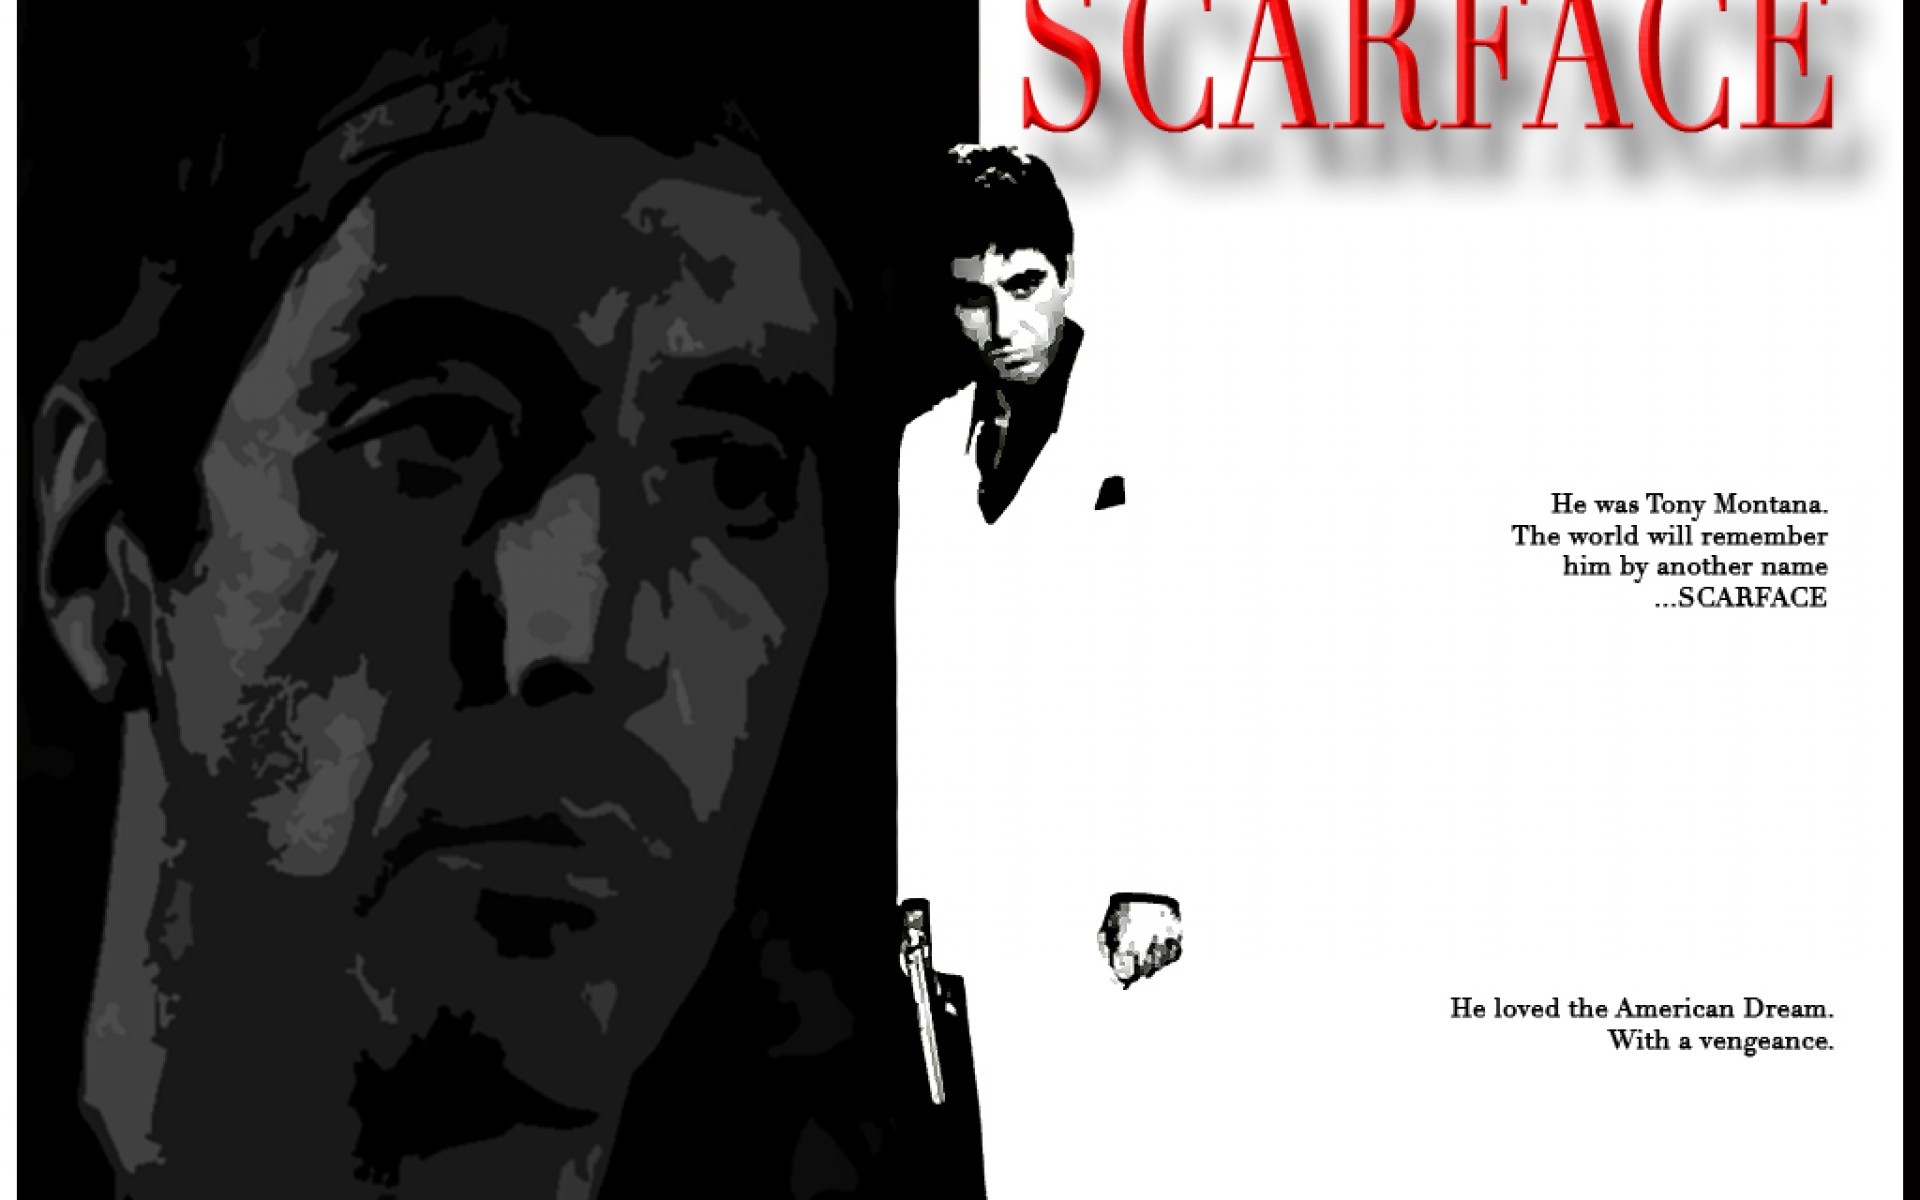 1920x1200 Scarface Tony Montana picture for desktop and wallpaperPicture for .